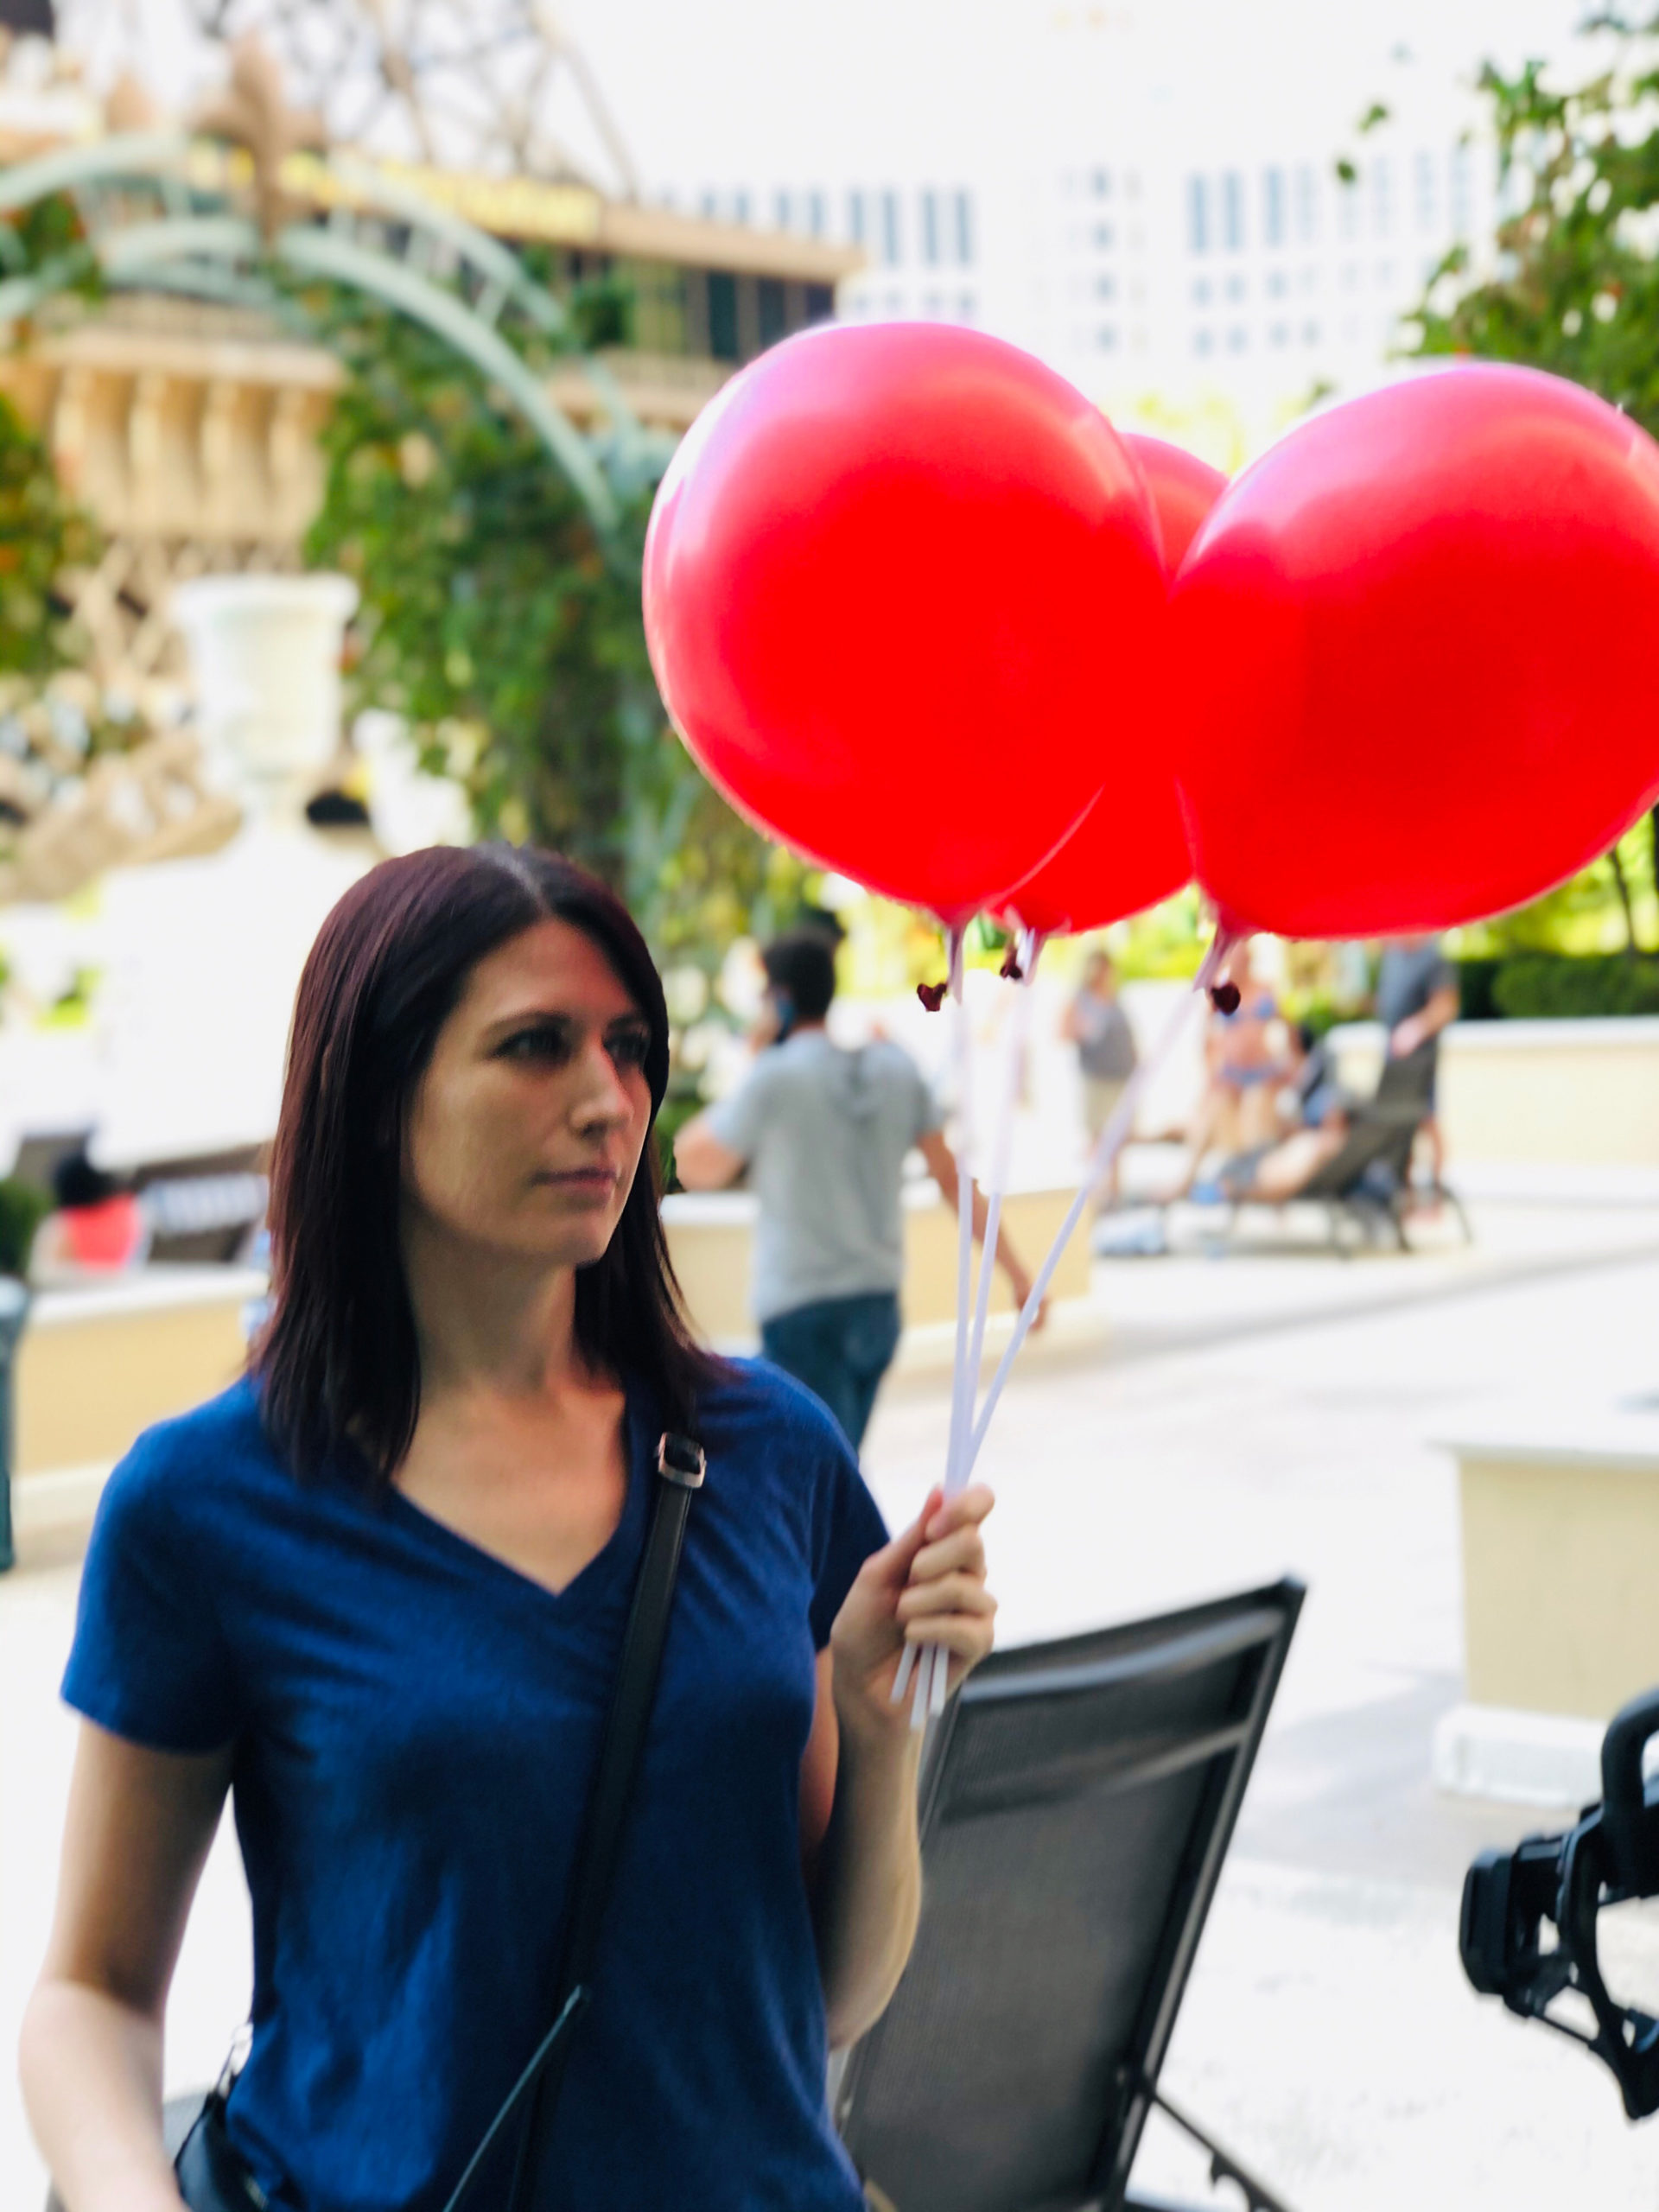 Amanda on set with red balloons